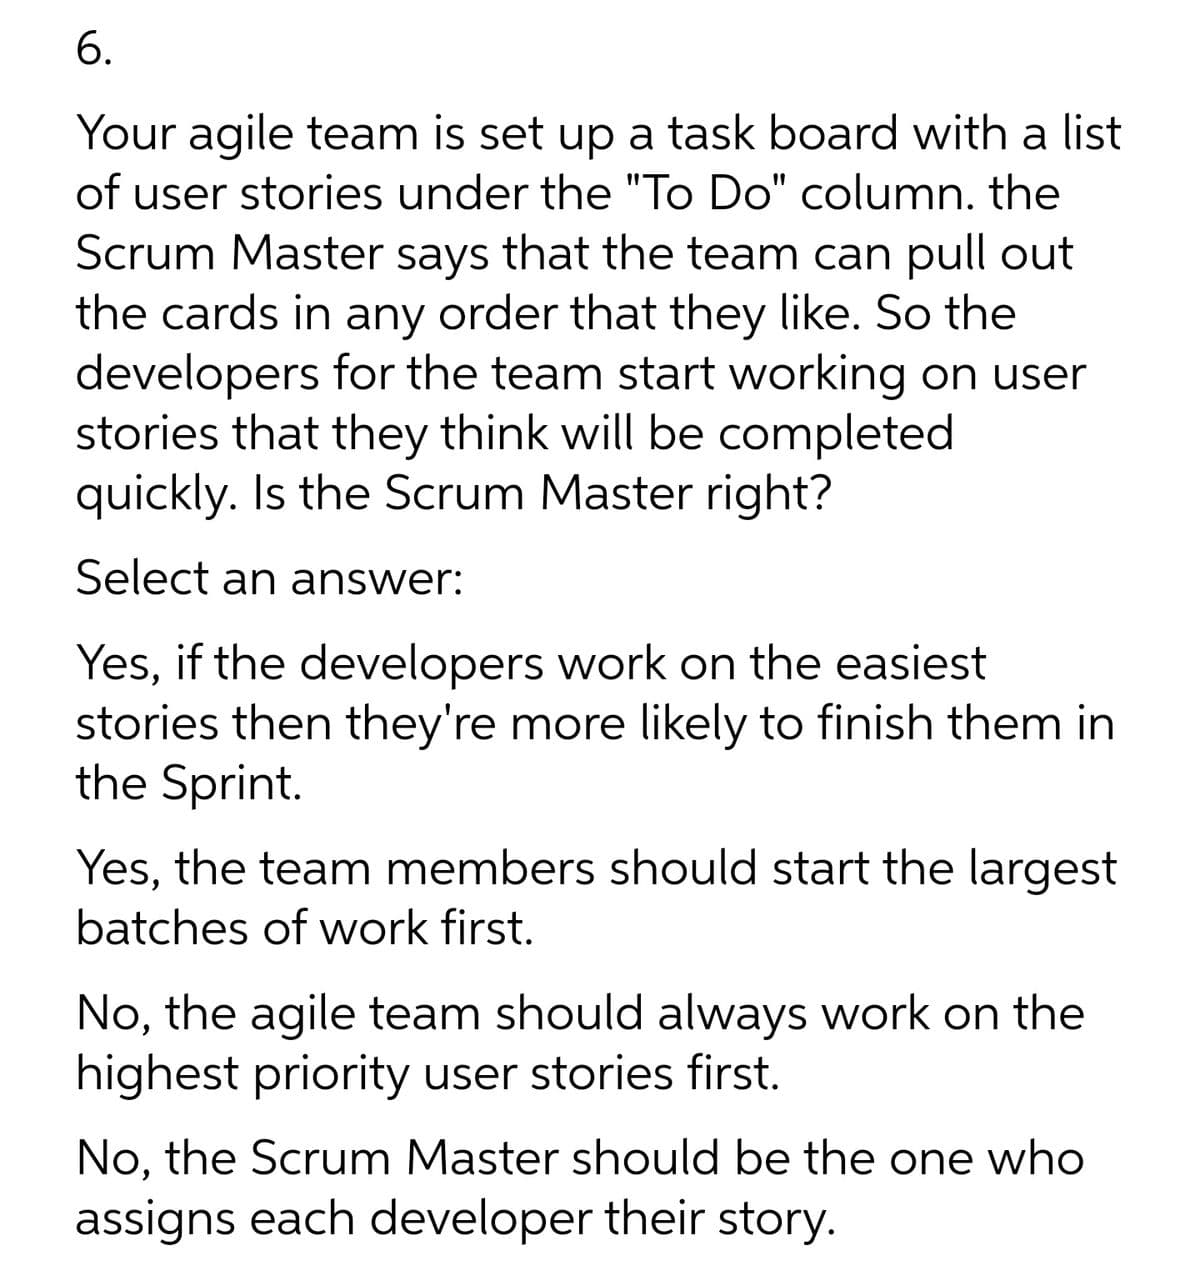 6.
Your agile team is set up a task board with a list
of user stories under the "To Do" column. the
Scrum Master says that the team can pull out
the cards in any order that they like. So the
developers for the team start working on user
stories that they think will be completed
quickly. Is the Scrum Master right?
Select an answer:
Yes, if the developers work on the easiest
stories then they're more likely to finish them in
the Sprint.
Yes, the team members should start the largest
batches of work first.
No, the agile team should always work on the
highest priority user stories first.
No, the Scrum Master should be the one who
assigns each developer their story.
